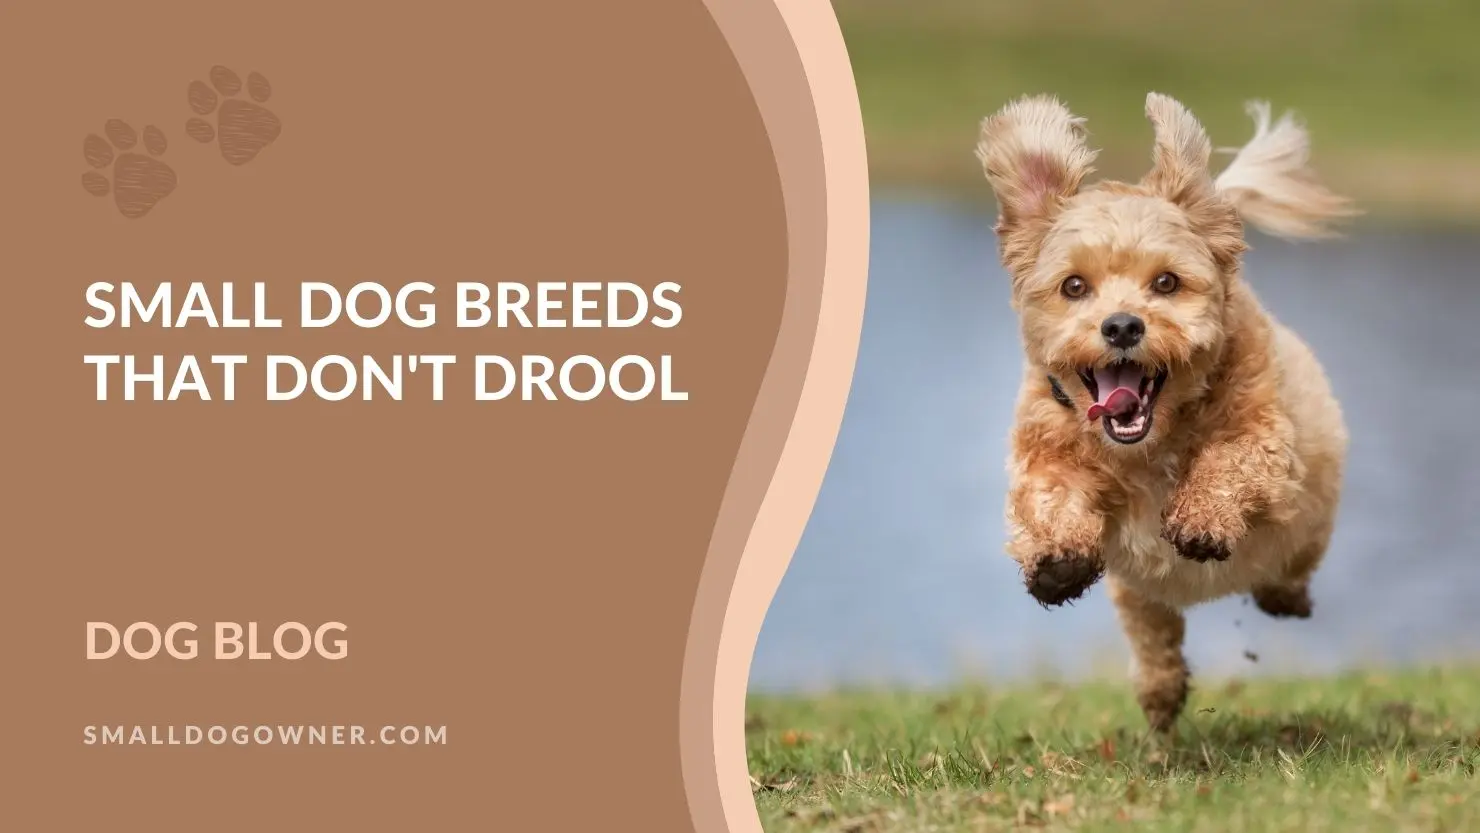 Small dog breeds that don't drool